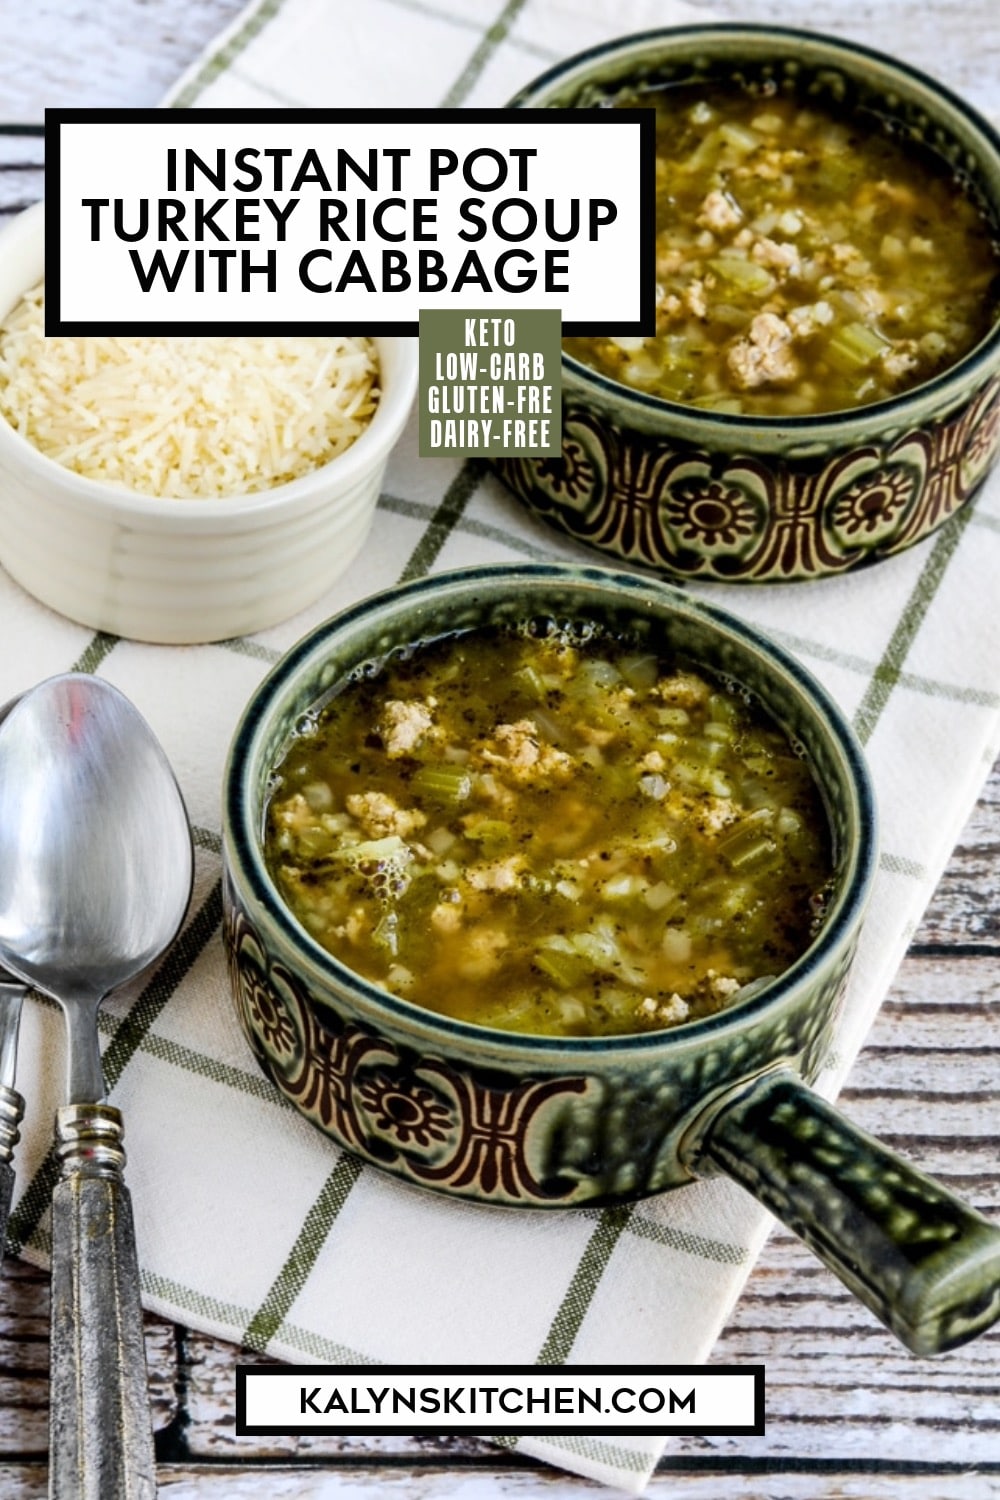 Pinterest image of Instant Pot Turkey Rice Soup with Cabbage